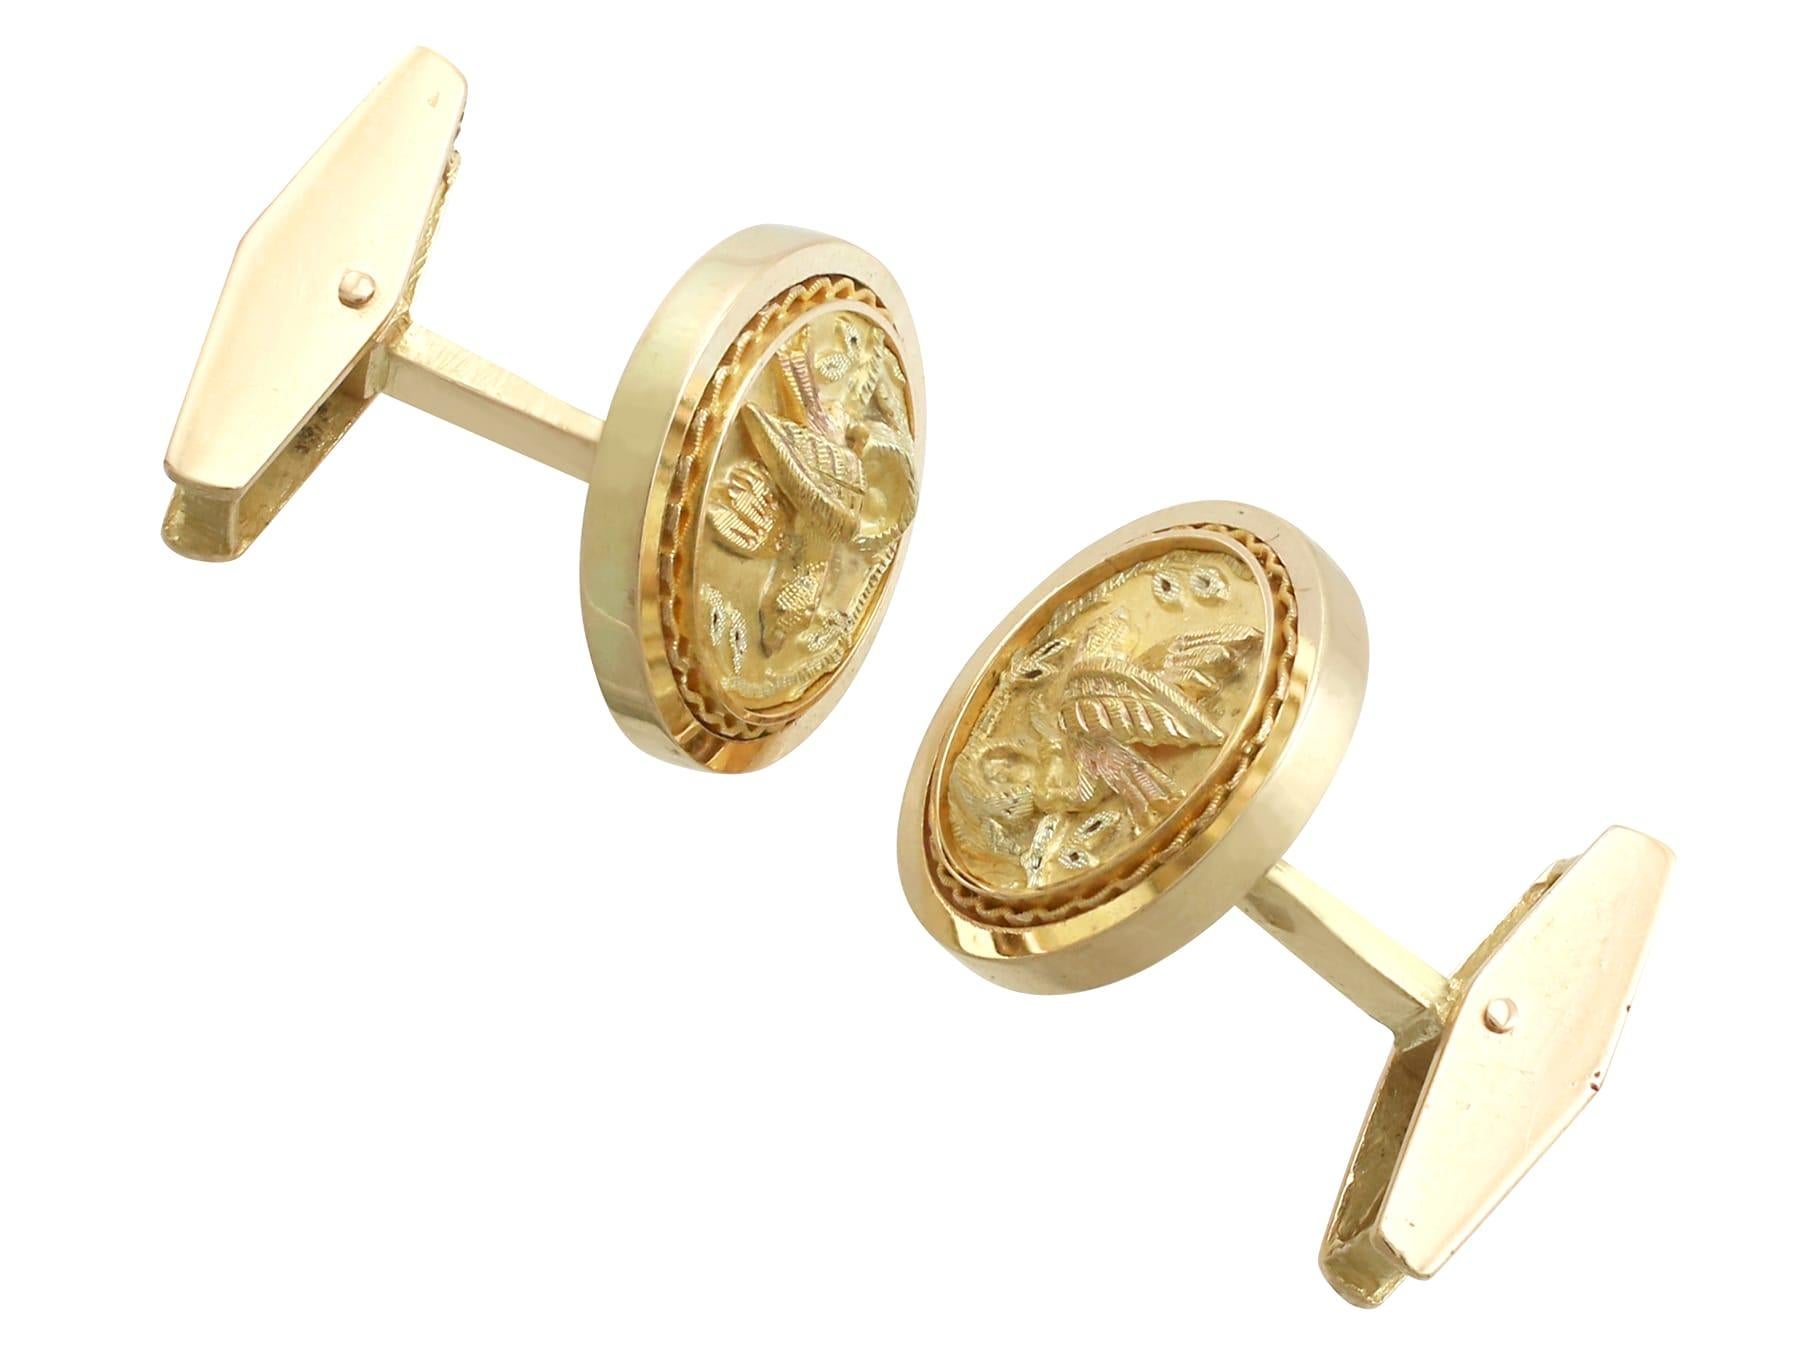 Vintage French 1950s Yellow Gold Bird Cufflinks In Excellent Condition For Sale In Jesmond, Newcastle Upon Tyne